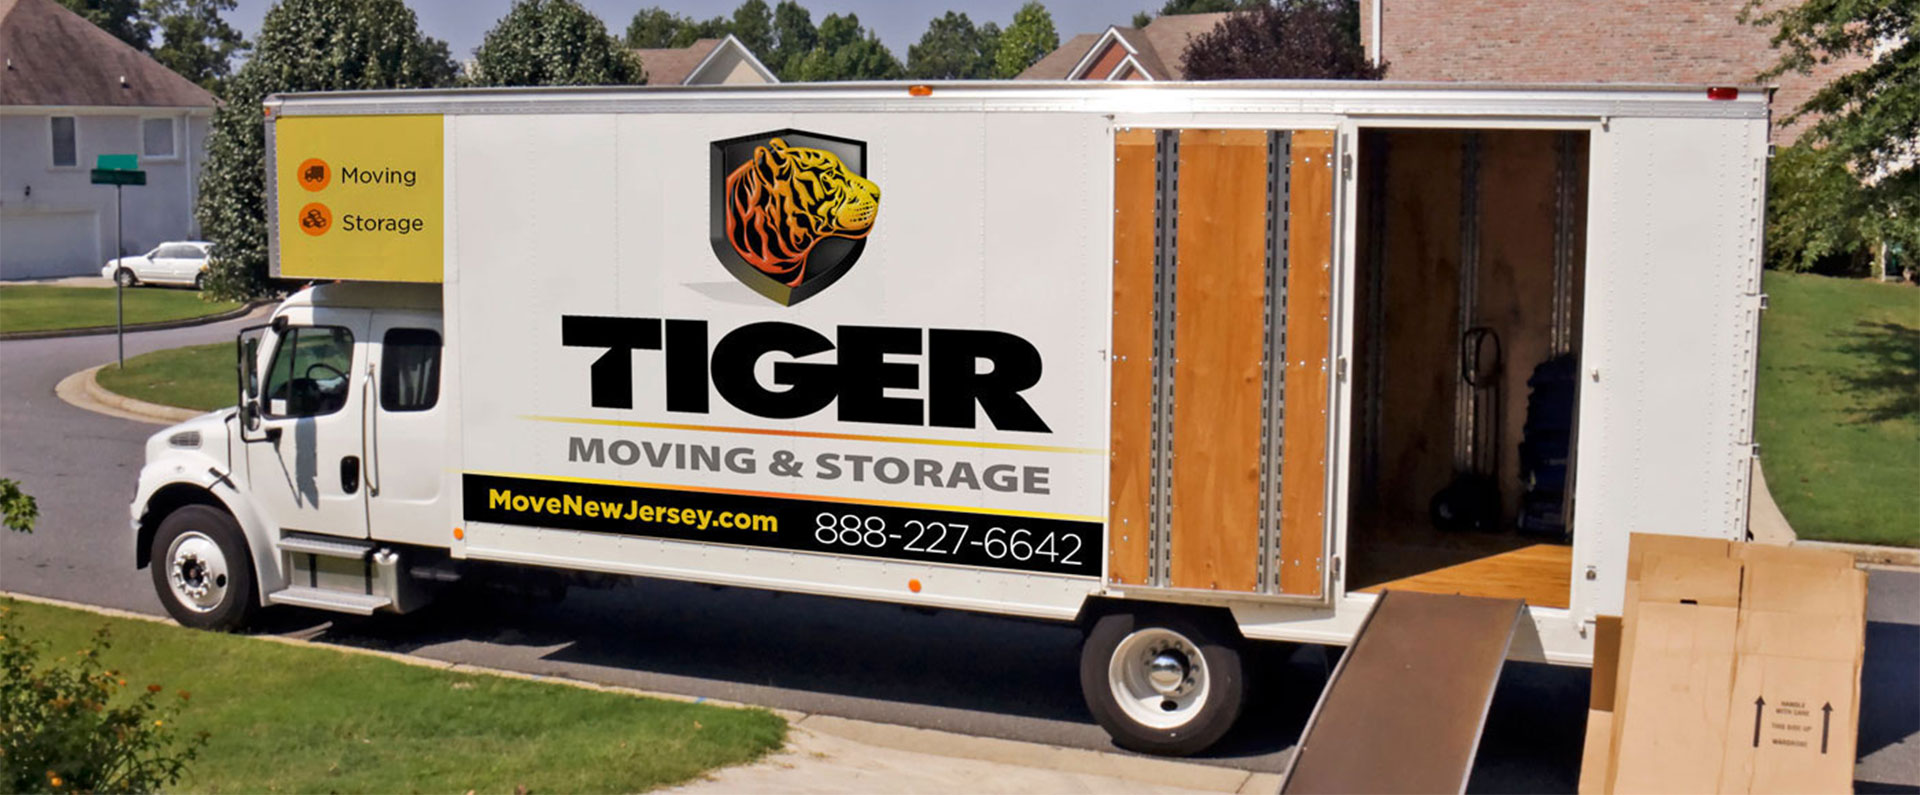 How To Choose A Local Moving Company In New Jersey Tips On Hiring Movers You Can Trust